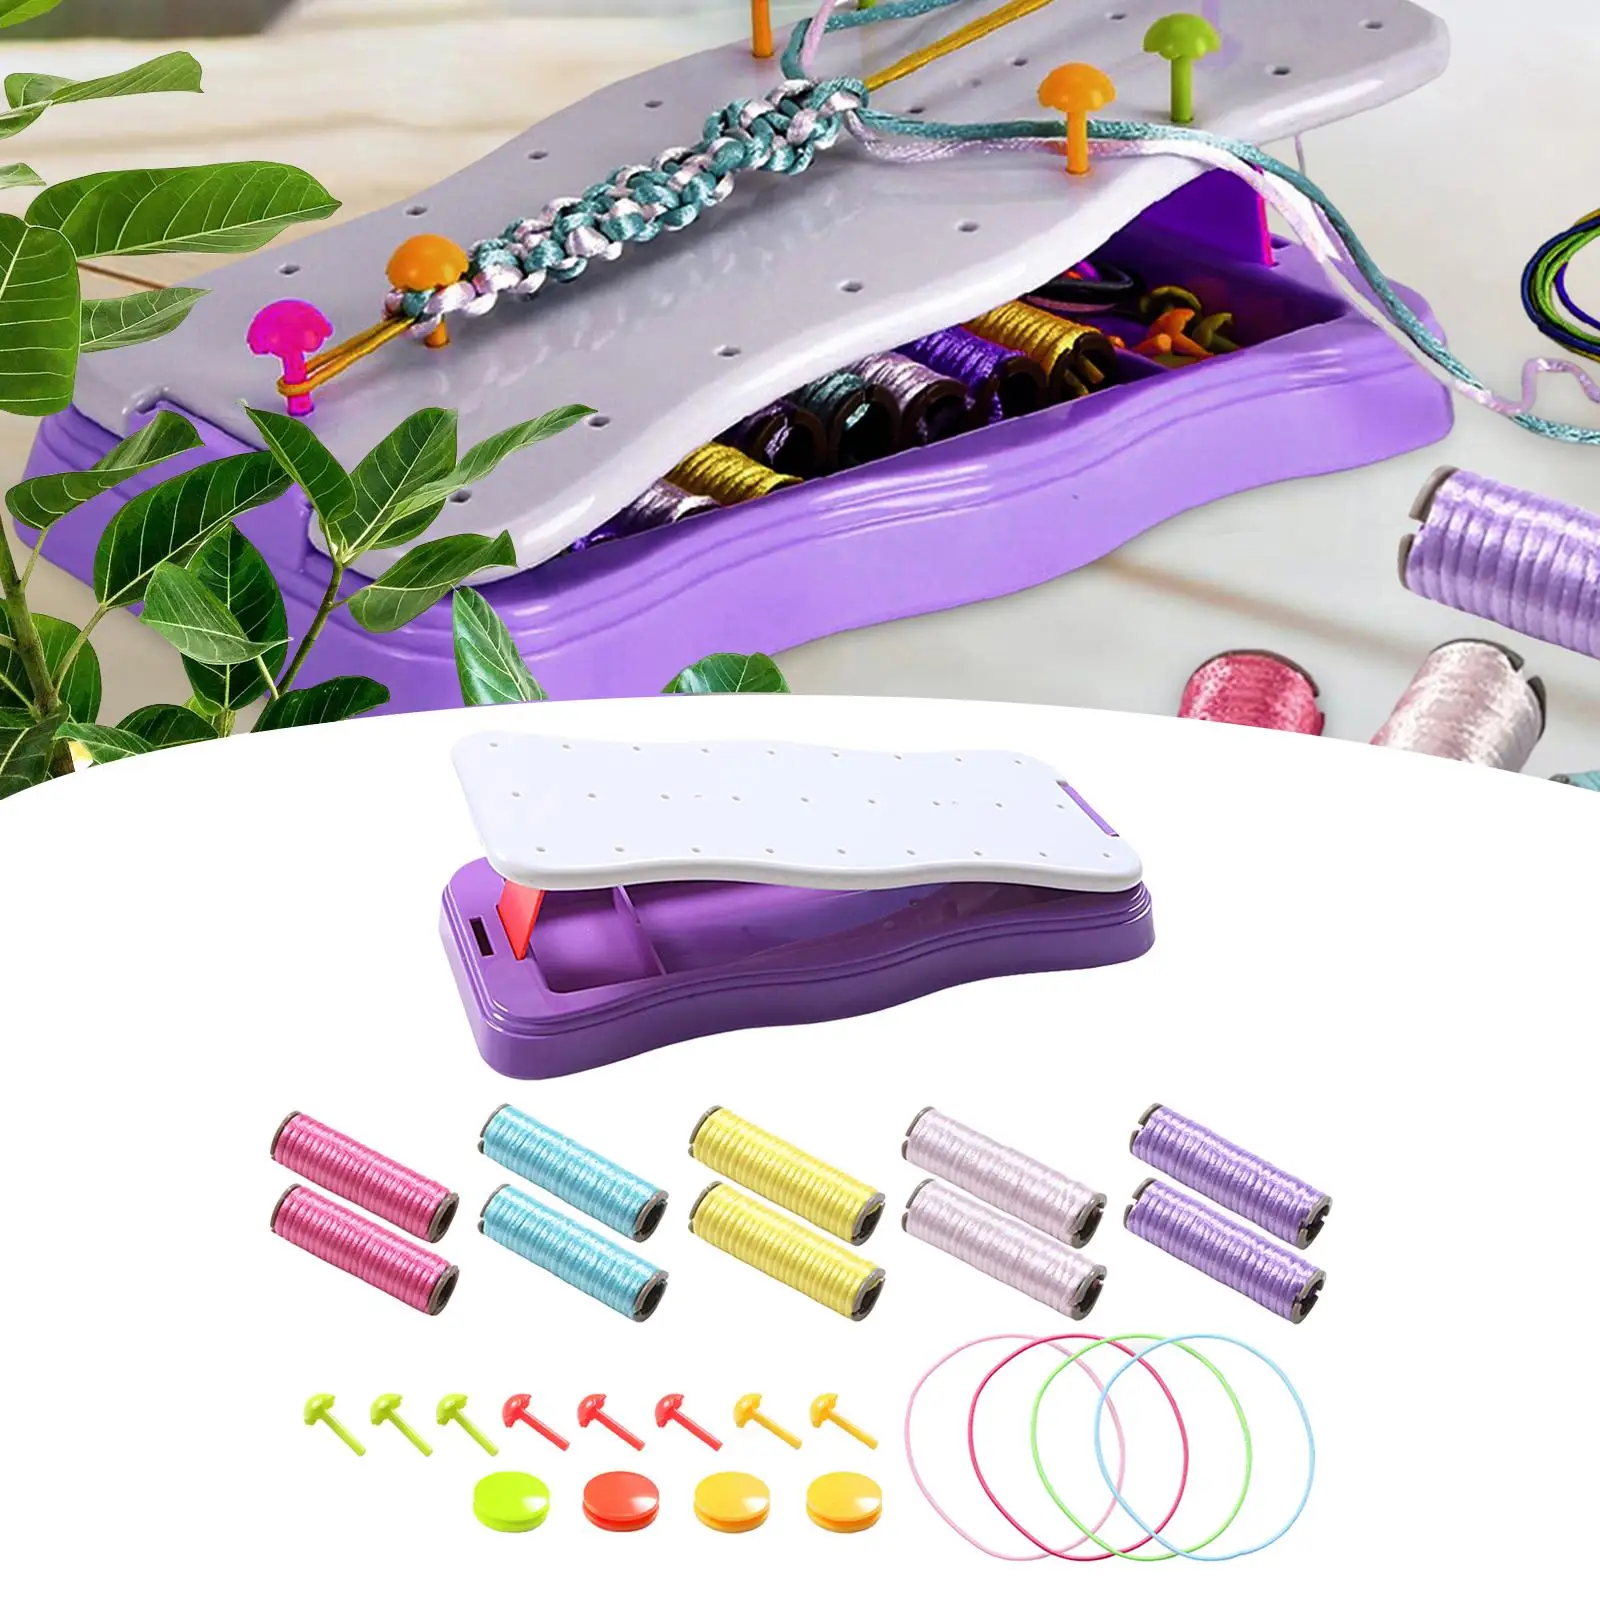 Bracelet Making Set Crafts Colorful for Girls Birthday Gifts Travel Activity